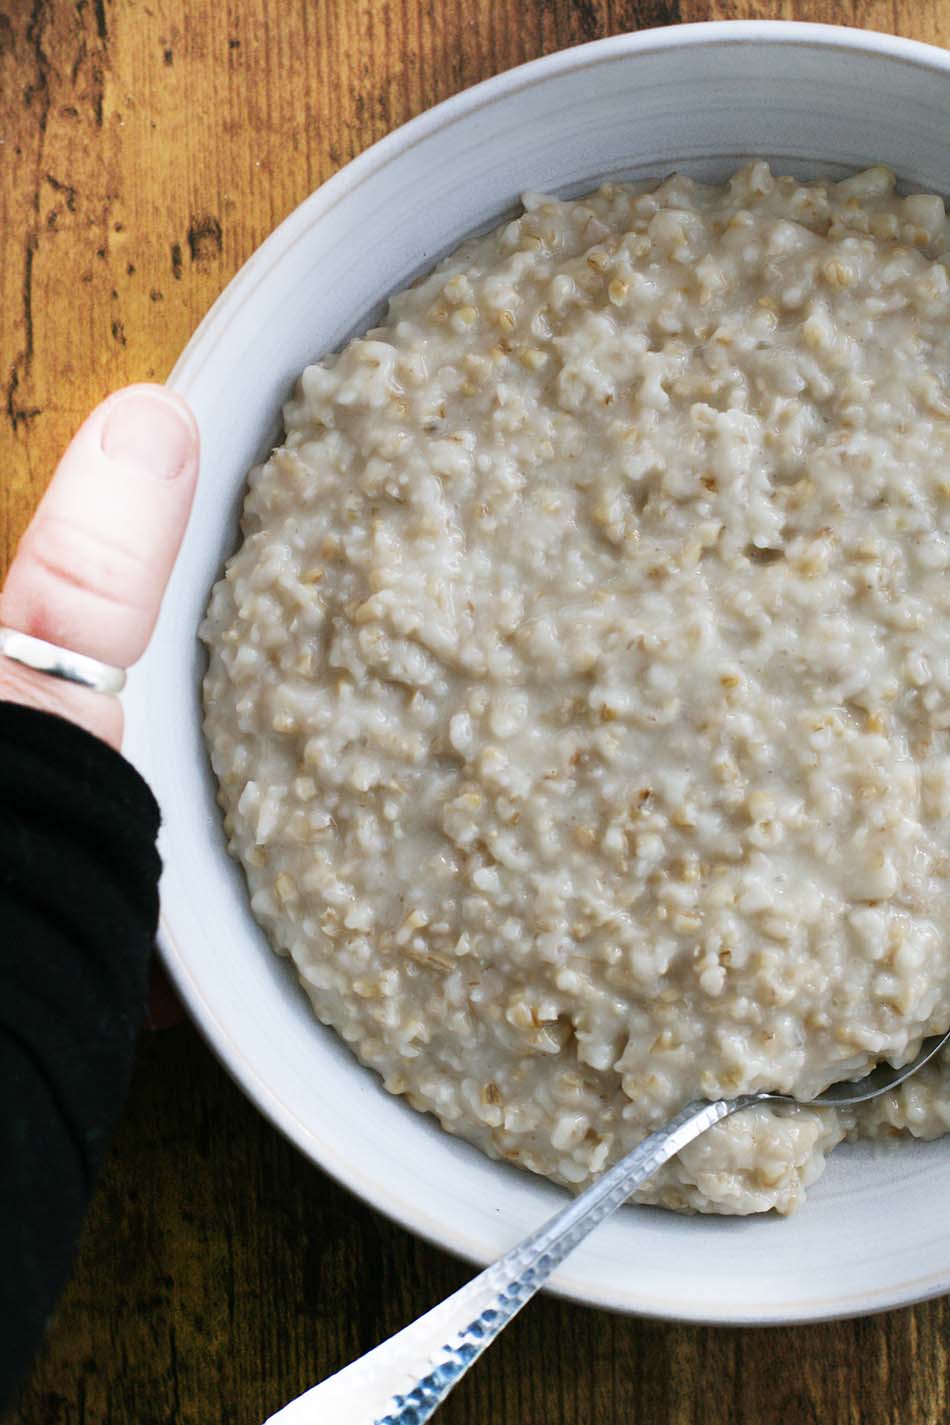 How to make steel cut oats in a slow cooker: The easiest way to make creamy steel cut oats. Cooks overnight.